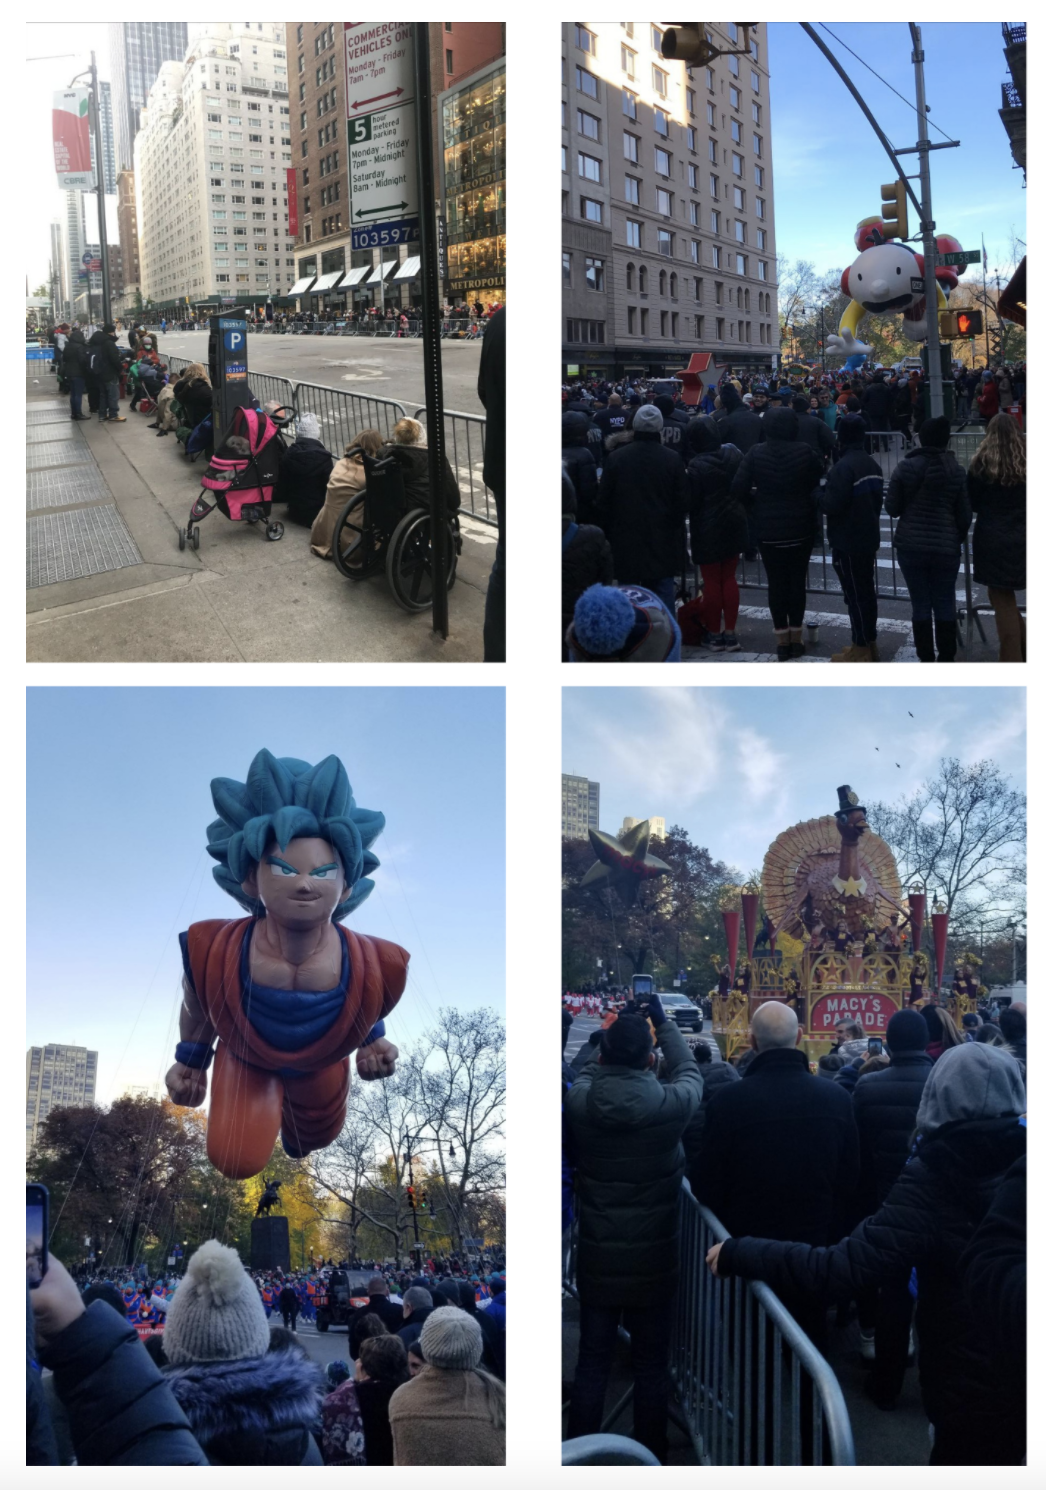 4 photos from different parts of the Macy's Thanksgiving Day Parade in Manhattan, NY